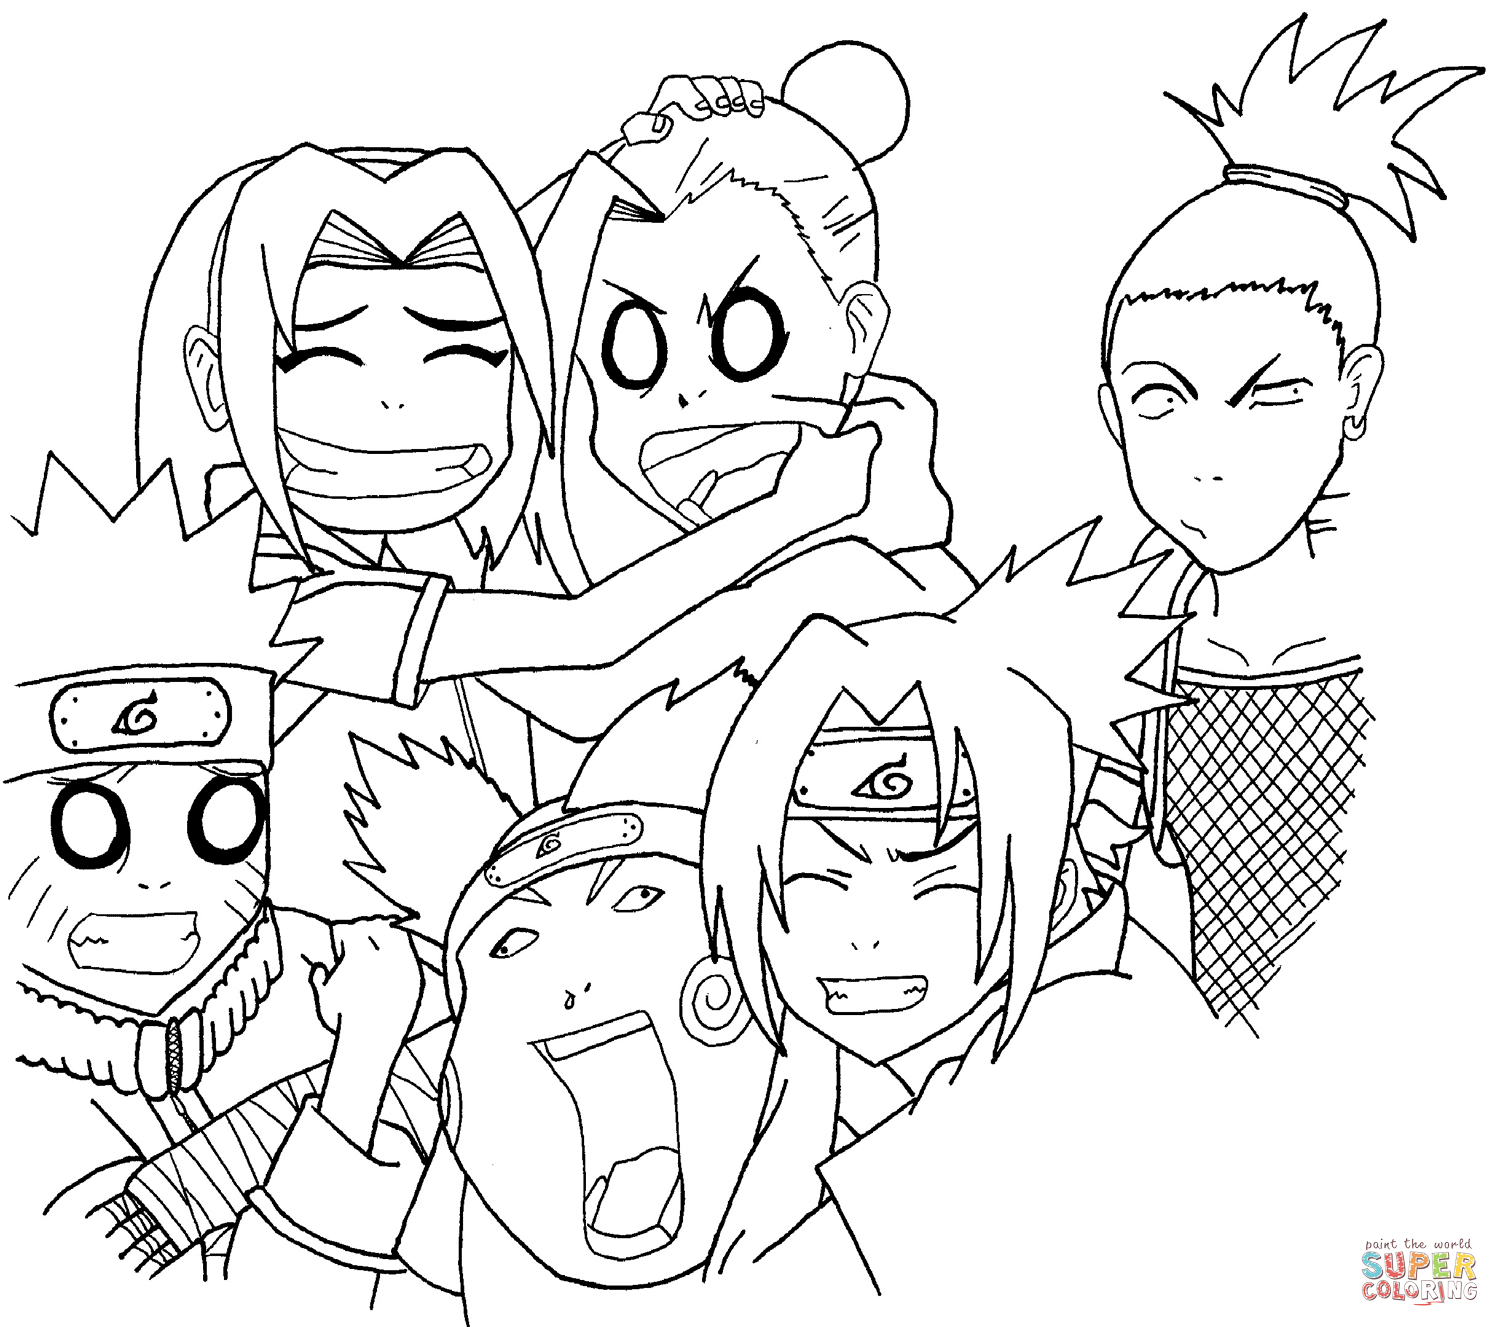 Anime Naruto Coloring Pages Naruto Squad 7 And 10 Coloring Page Free Printable Coloring Pages